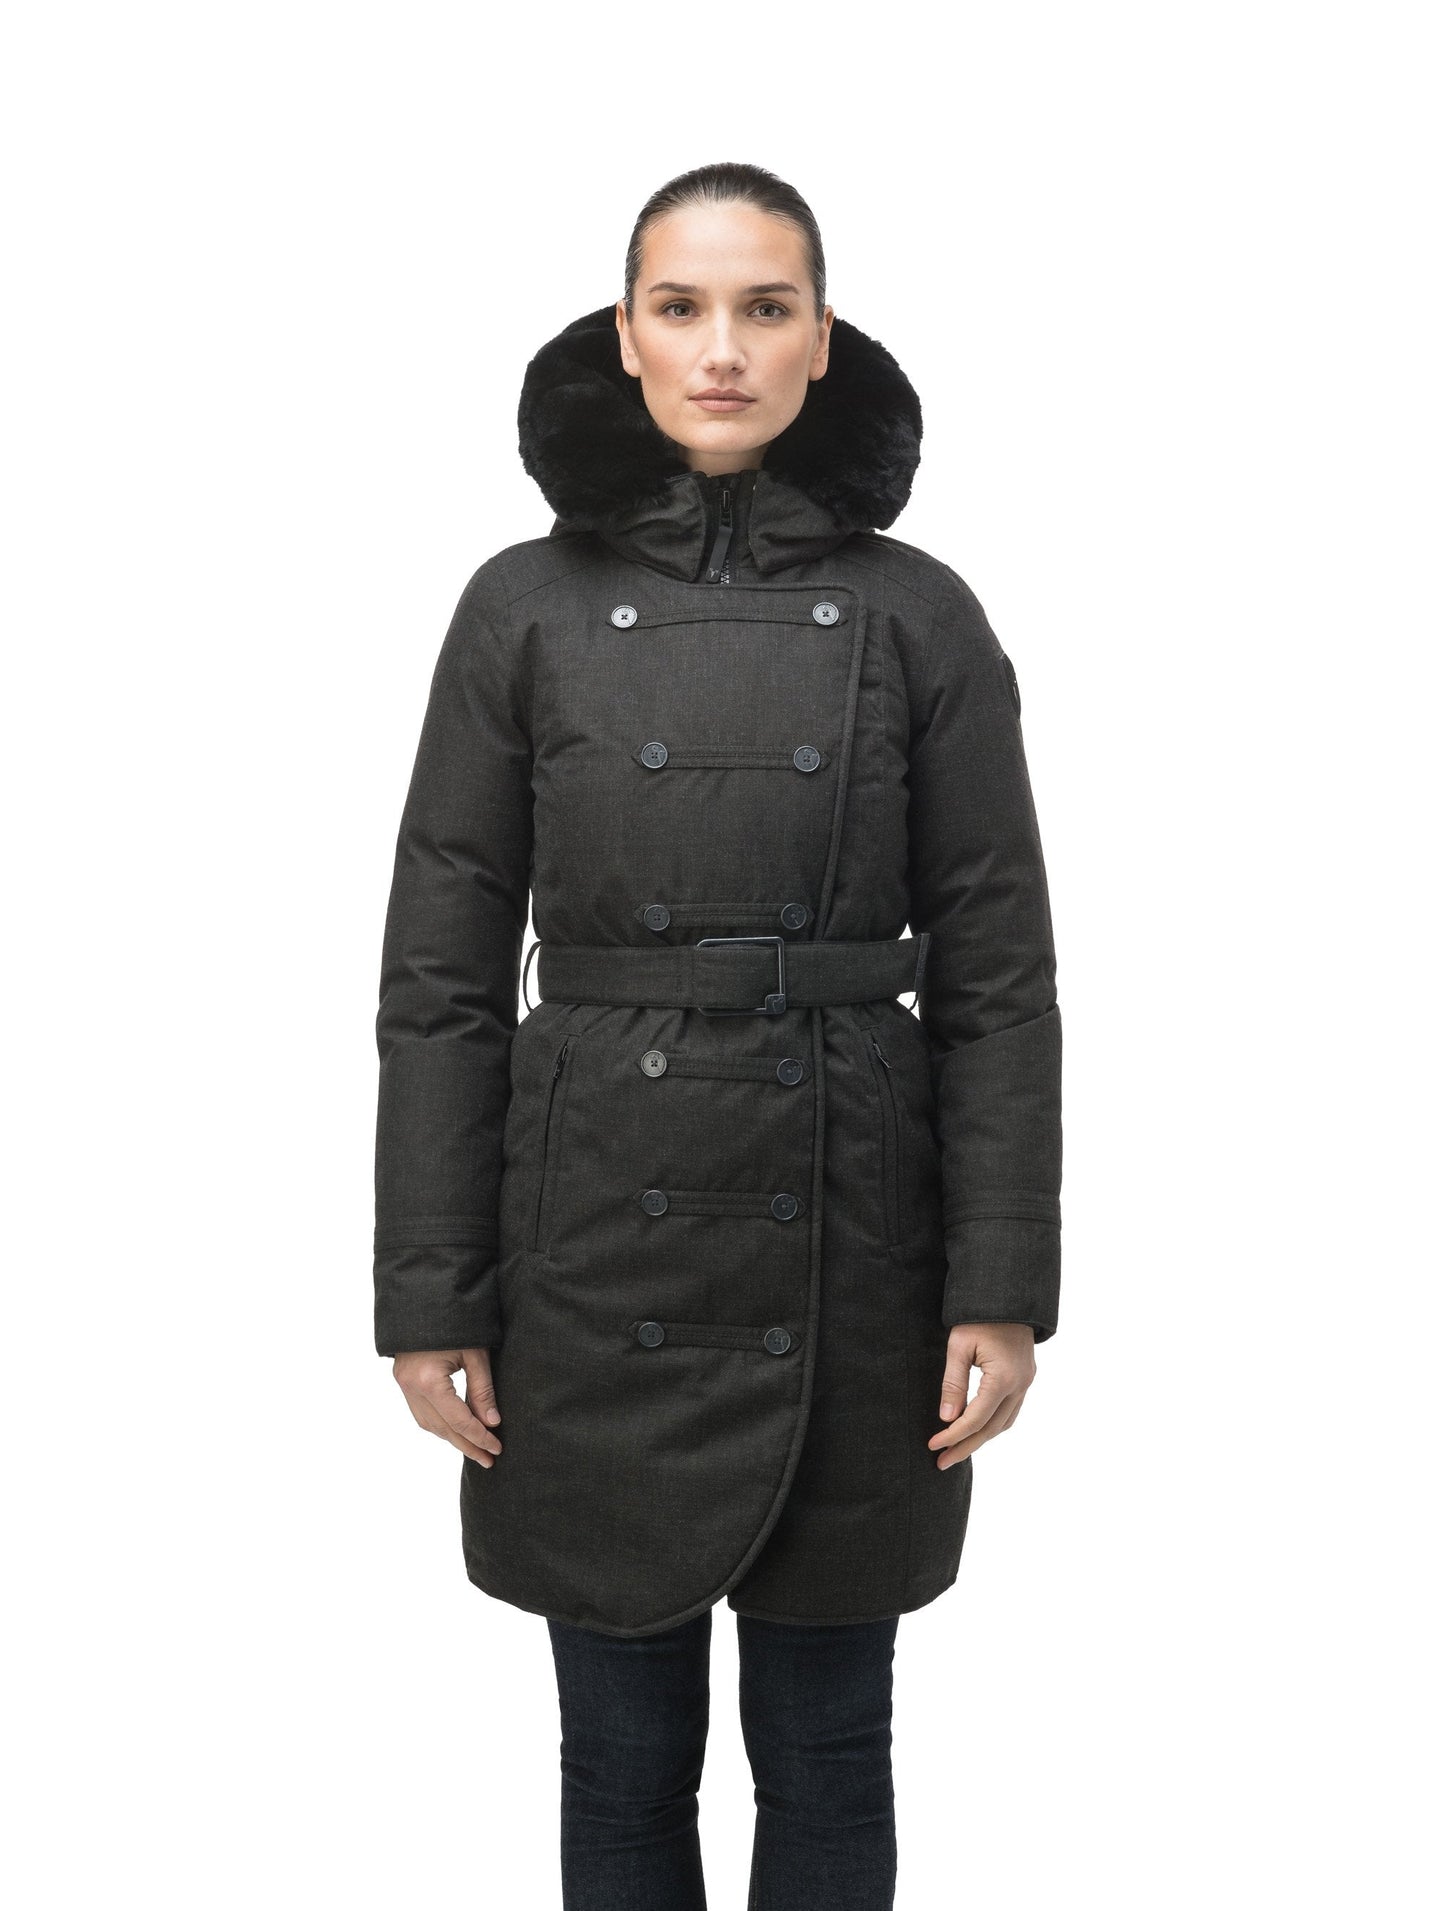 Women's down filled calf length parka with belted waist, and removable Rex Rabbit fur collar in H. Black